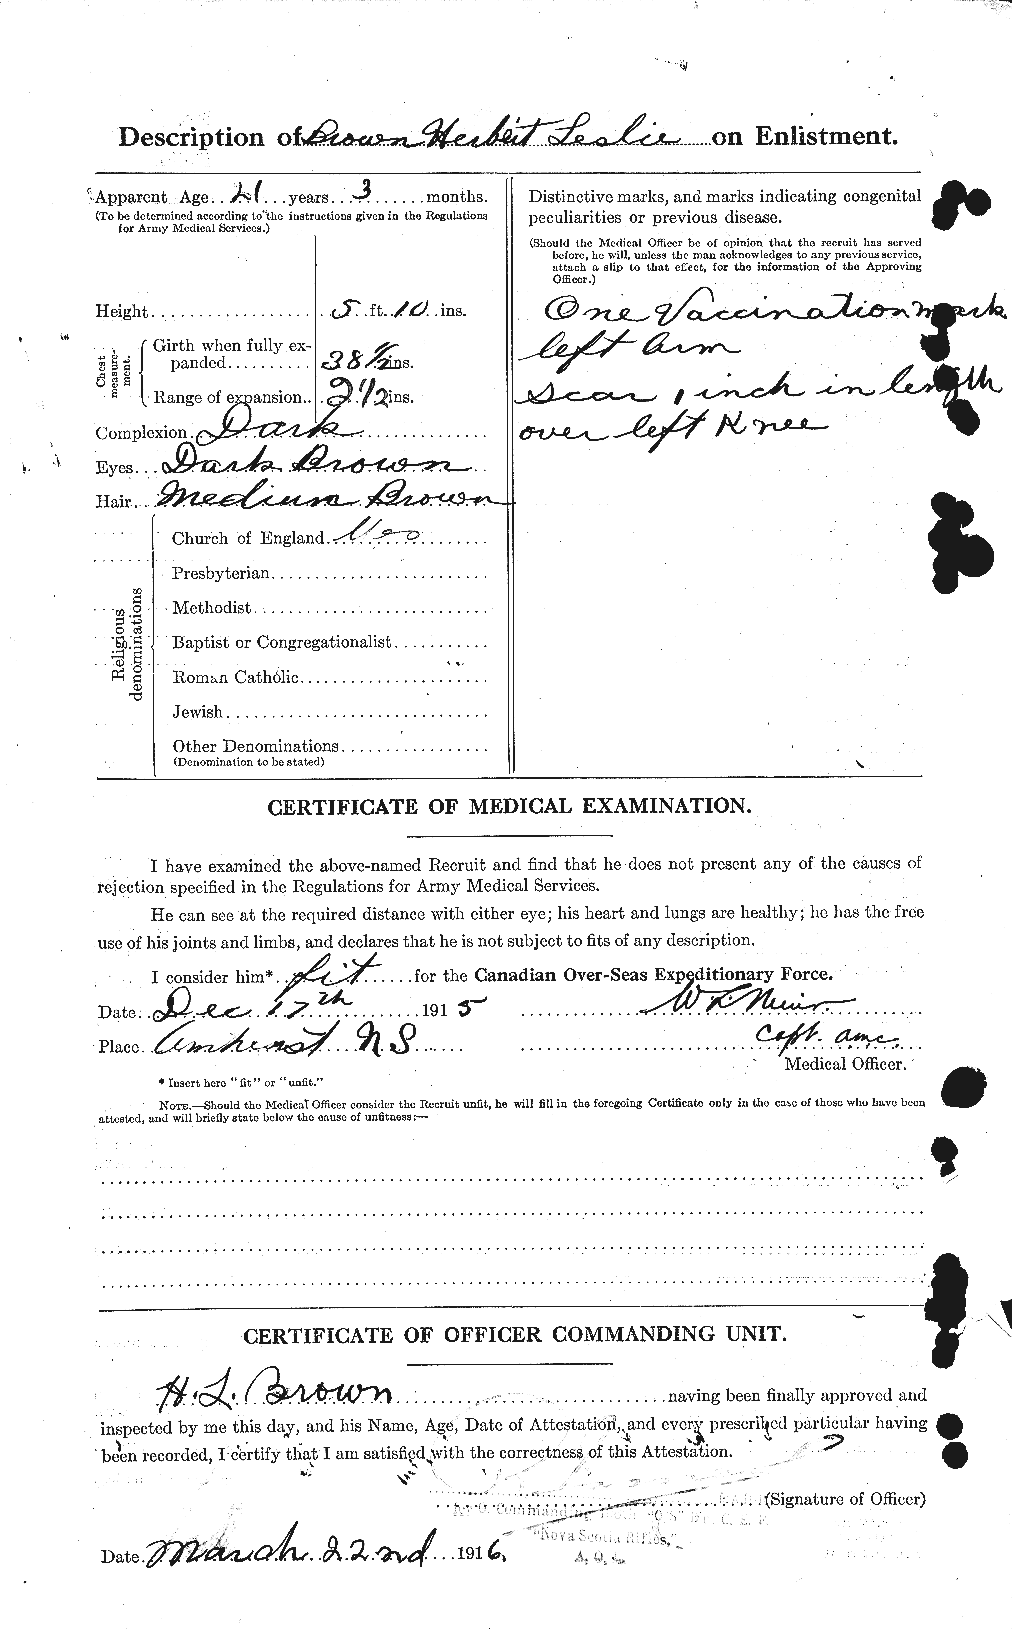 Personnel Records of the First World War - CEF 265579b